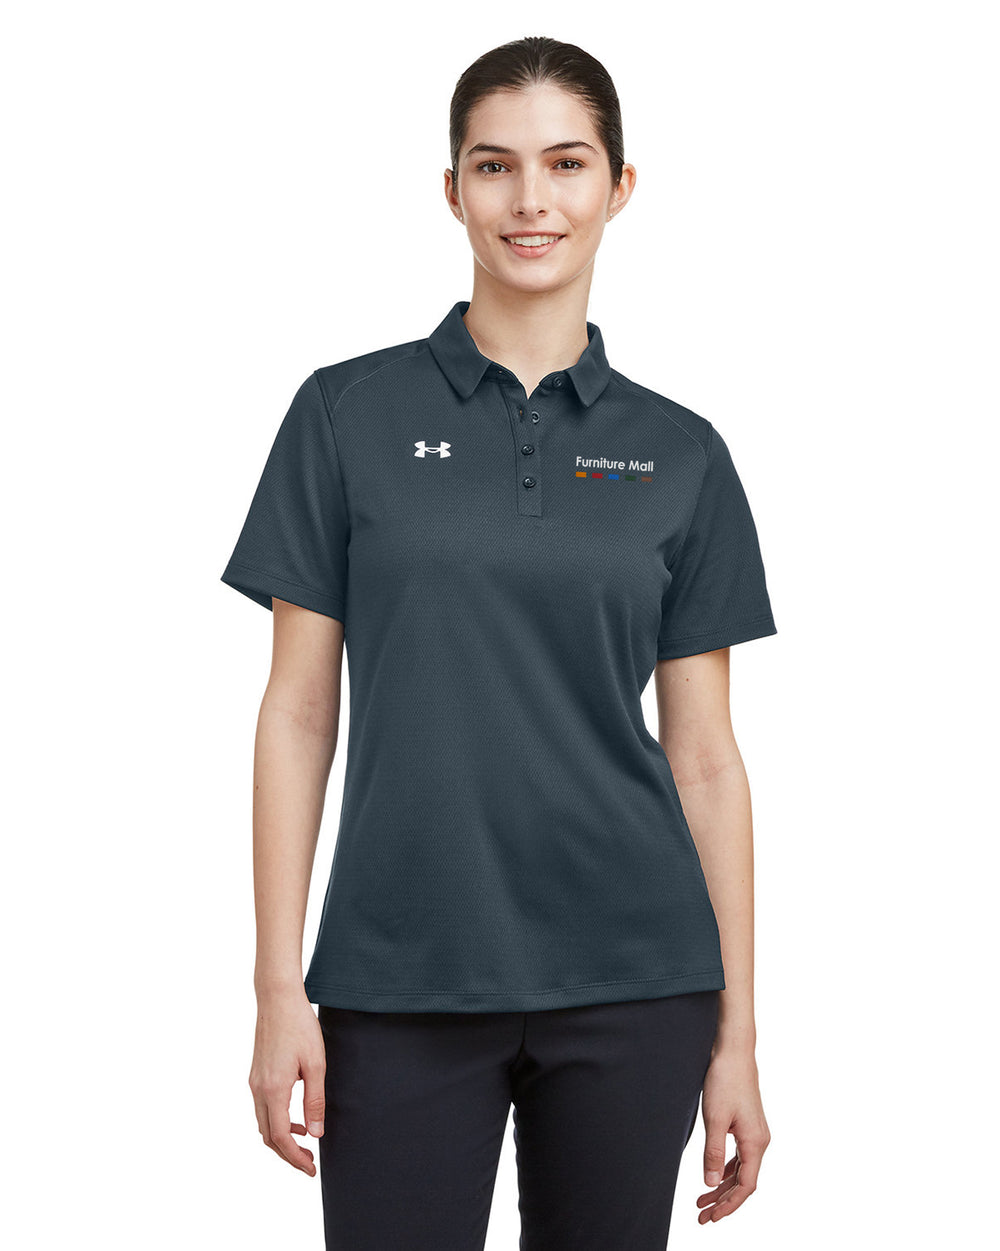 Furniture Mall - Under Armour Ladies' Tech Polo - 1370431